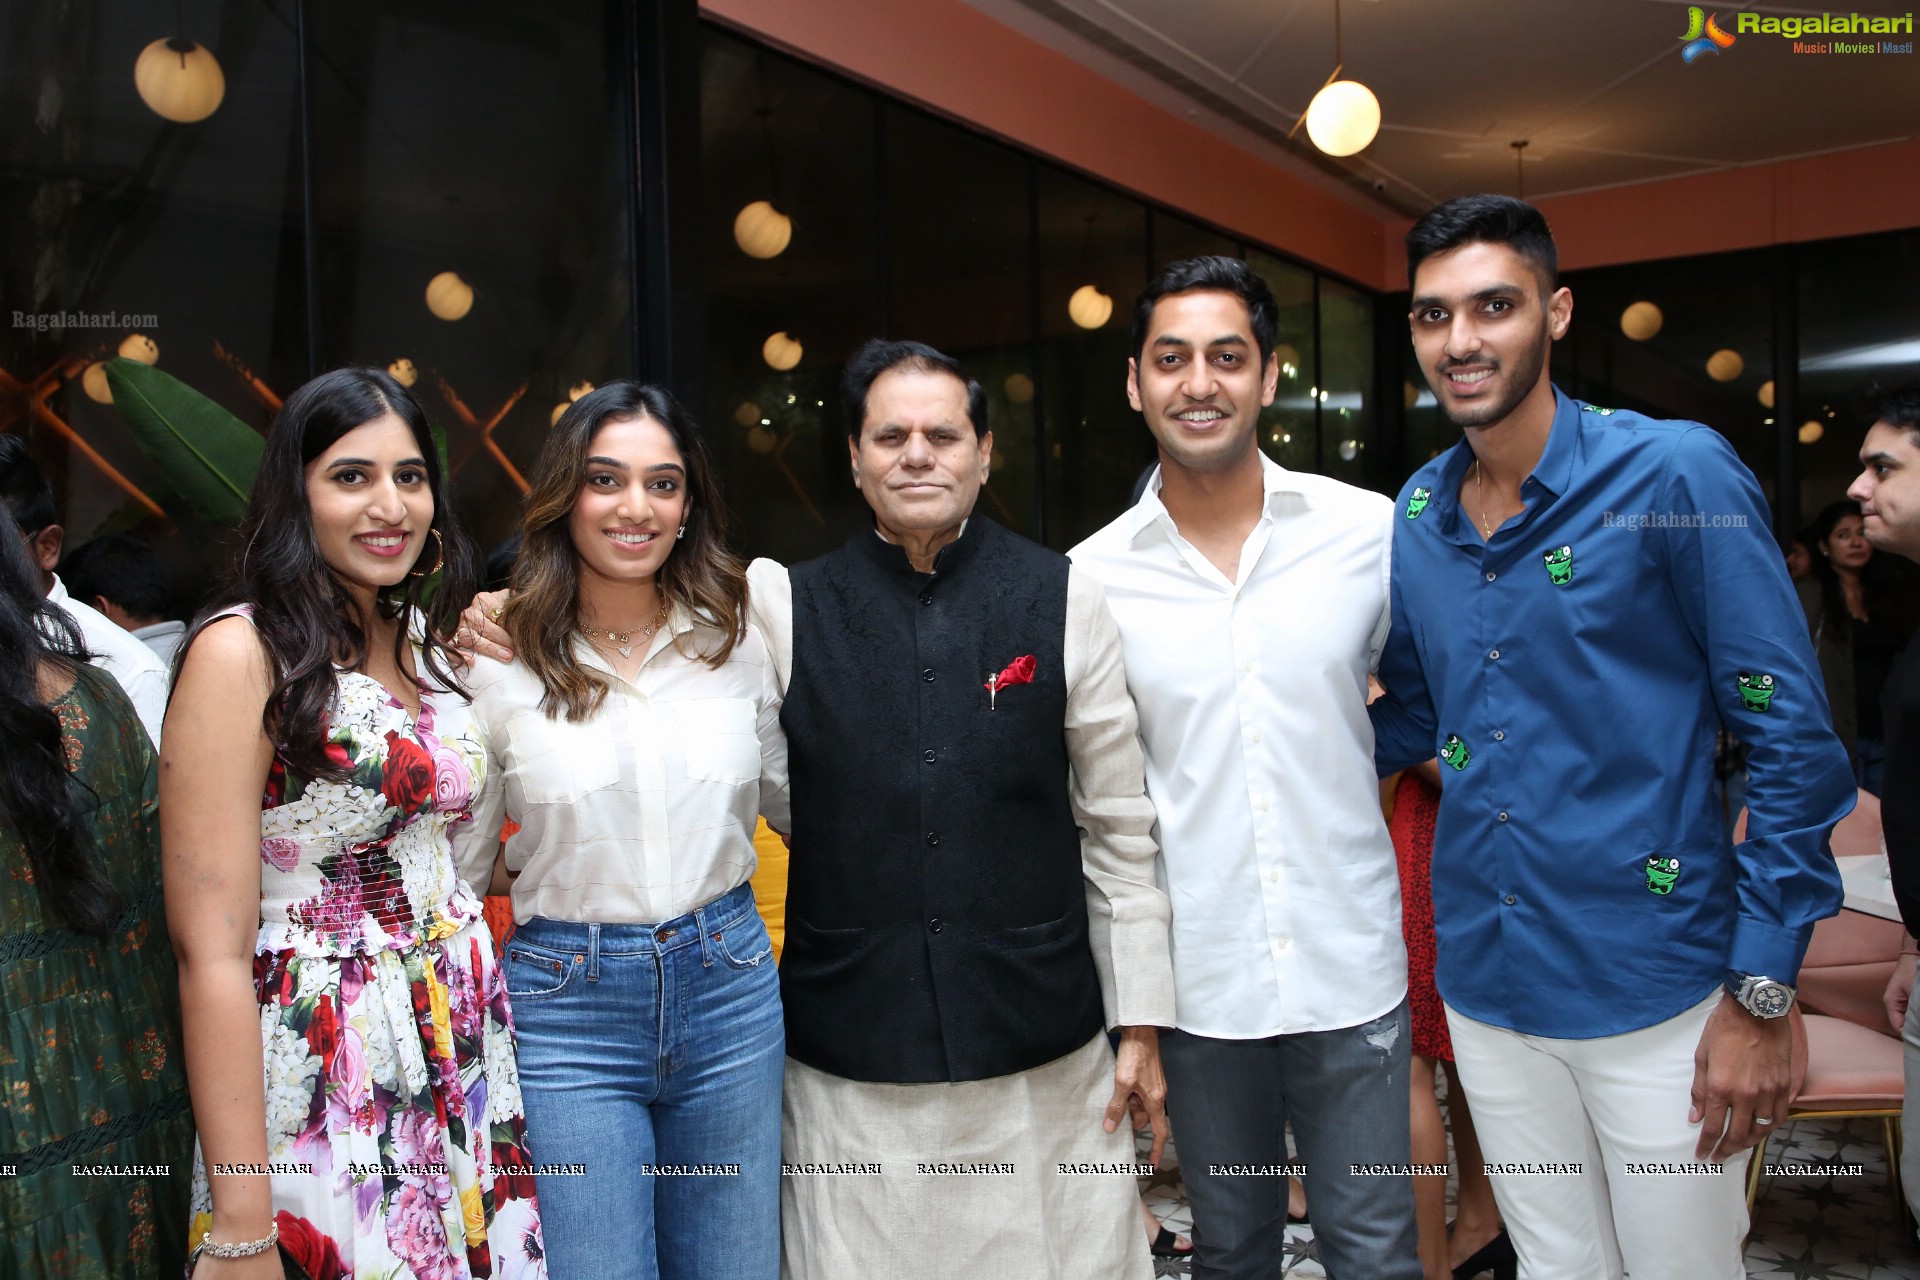 Tiger Lily - Cafe and Bistro Launch